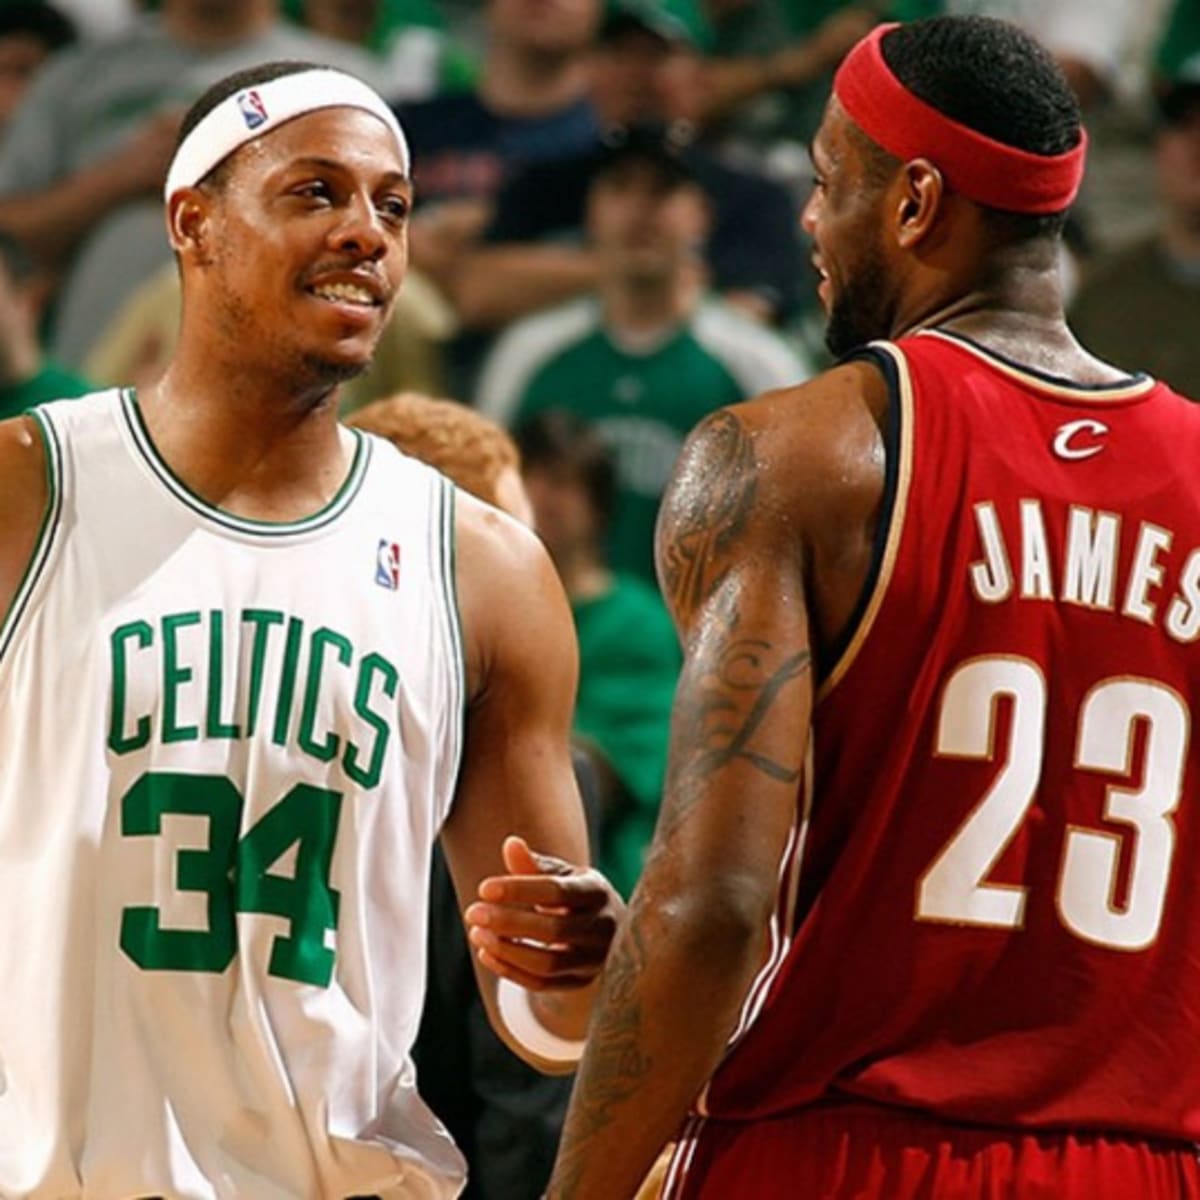 LeBron James Vs. Paul Pierce - An Underrated Rivalry for the Ages